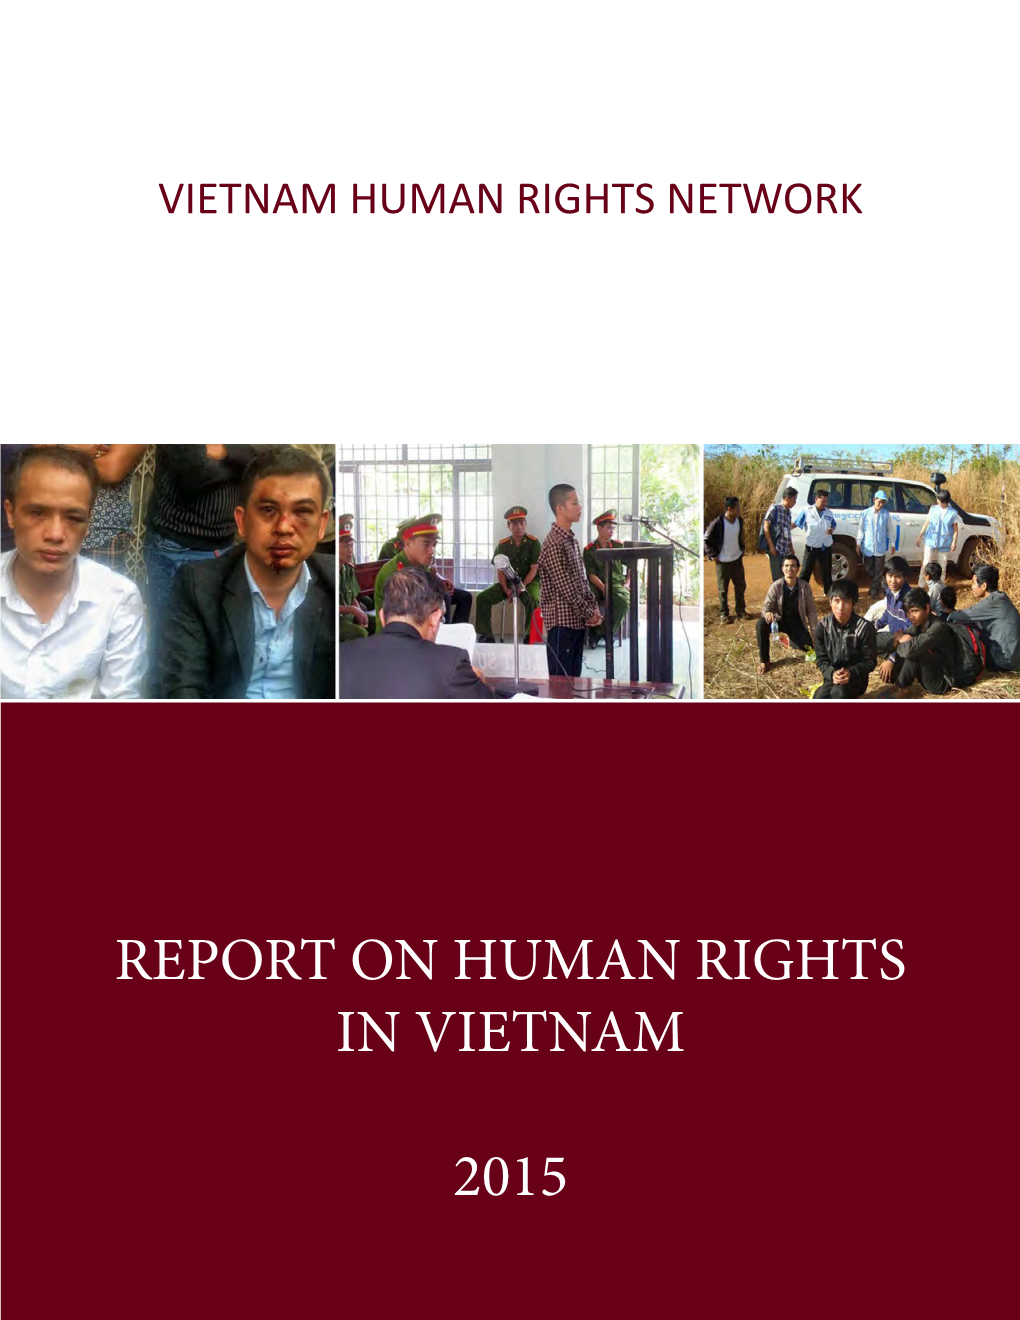 Report on Human Rights in Vietnam 2015